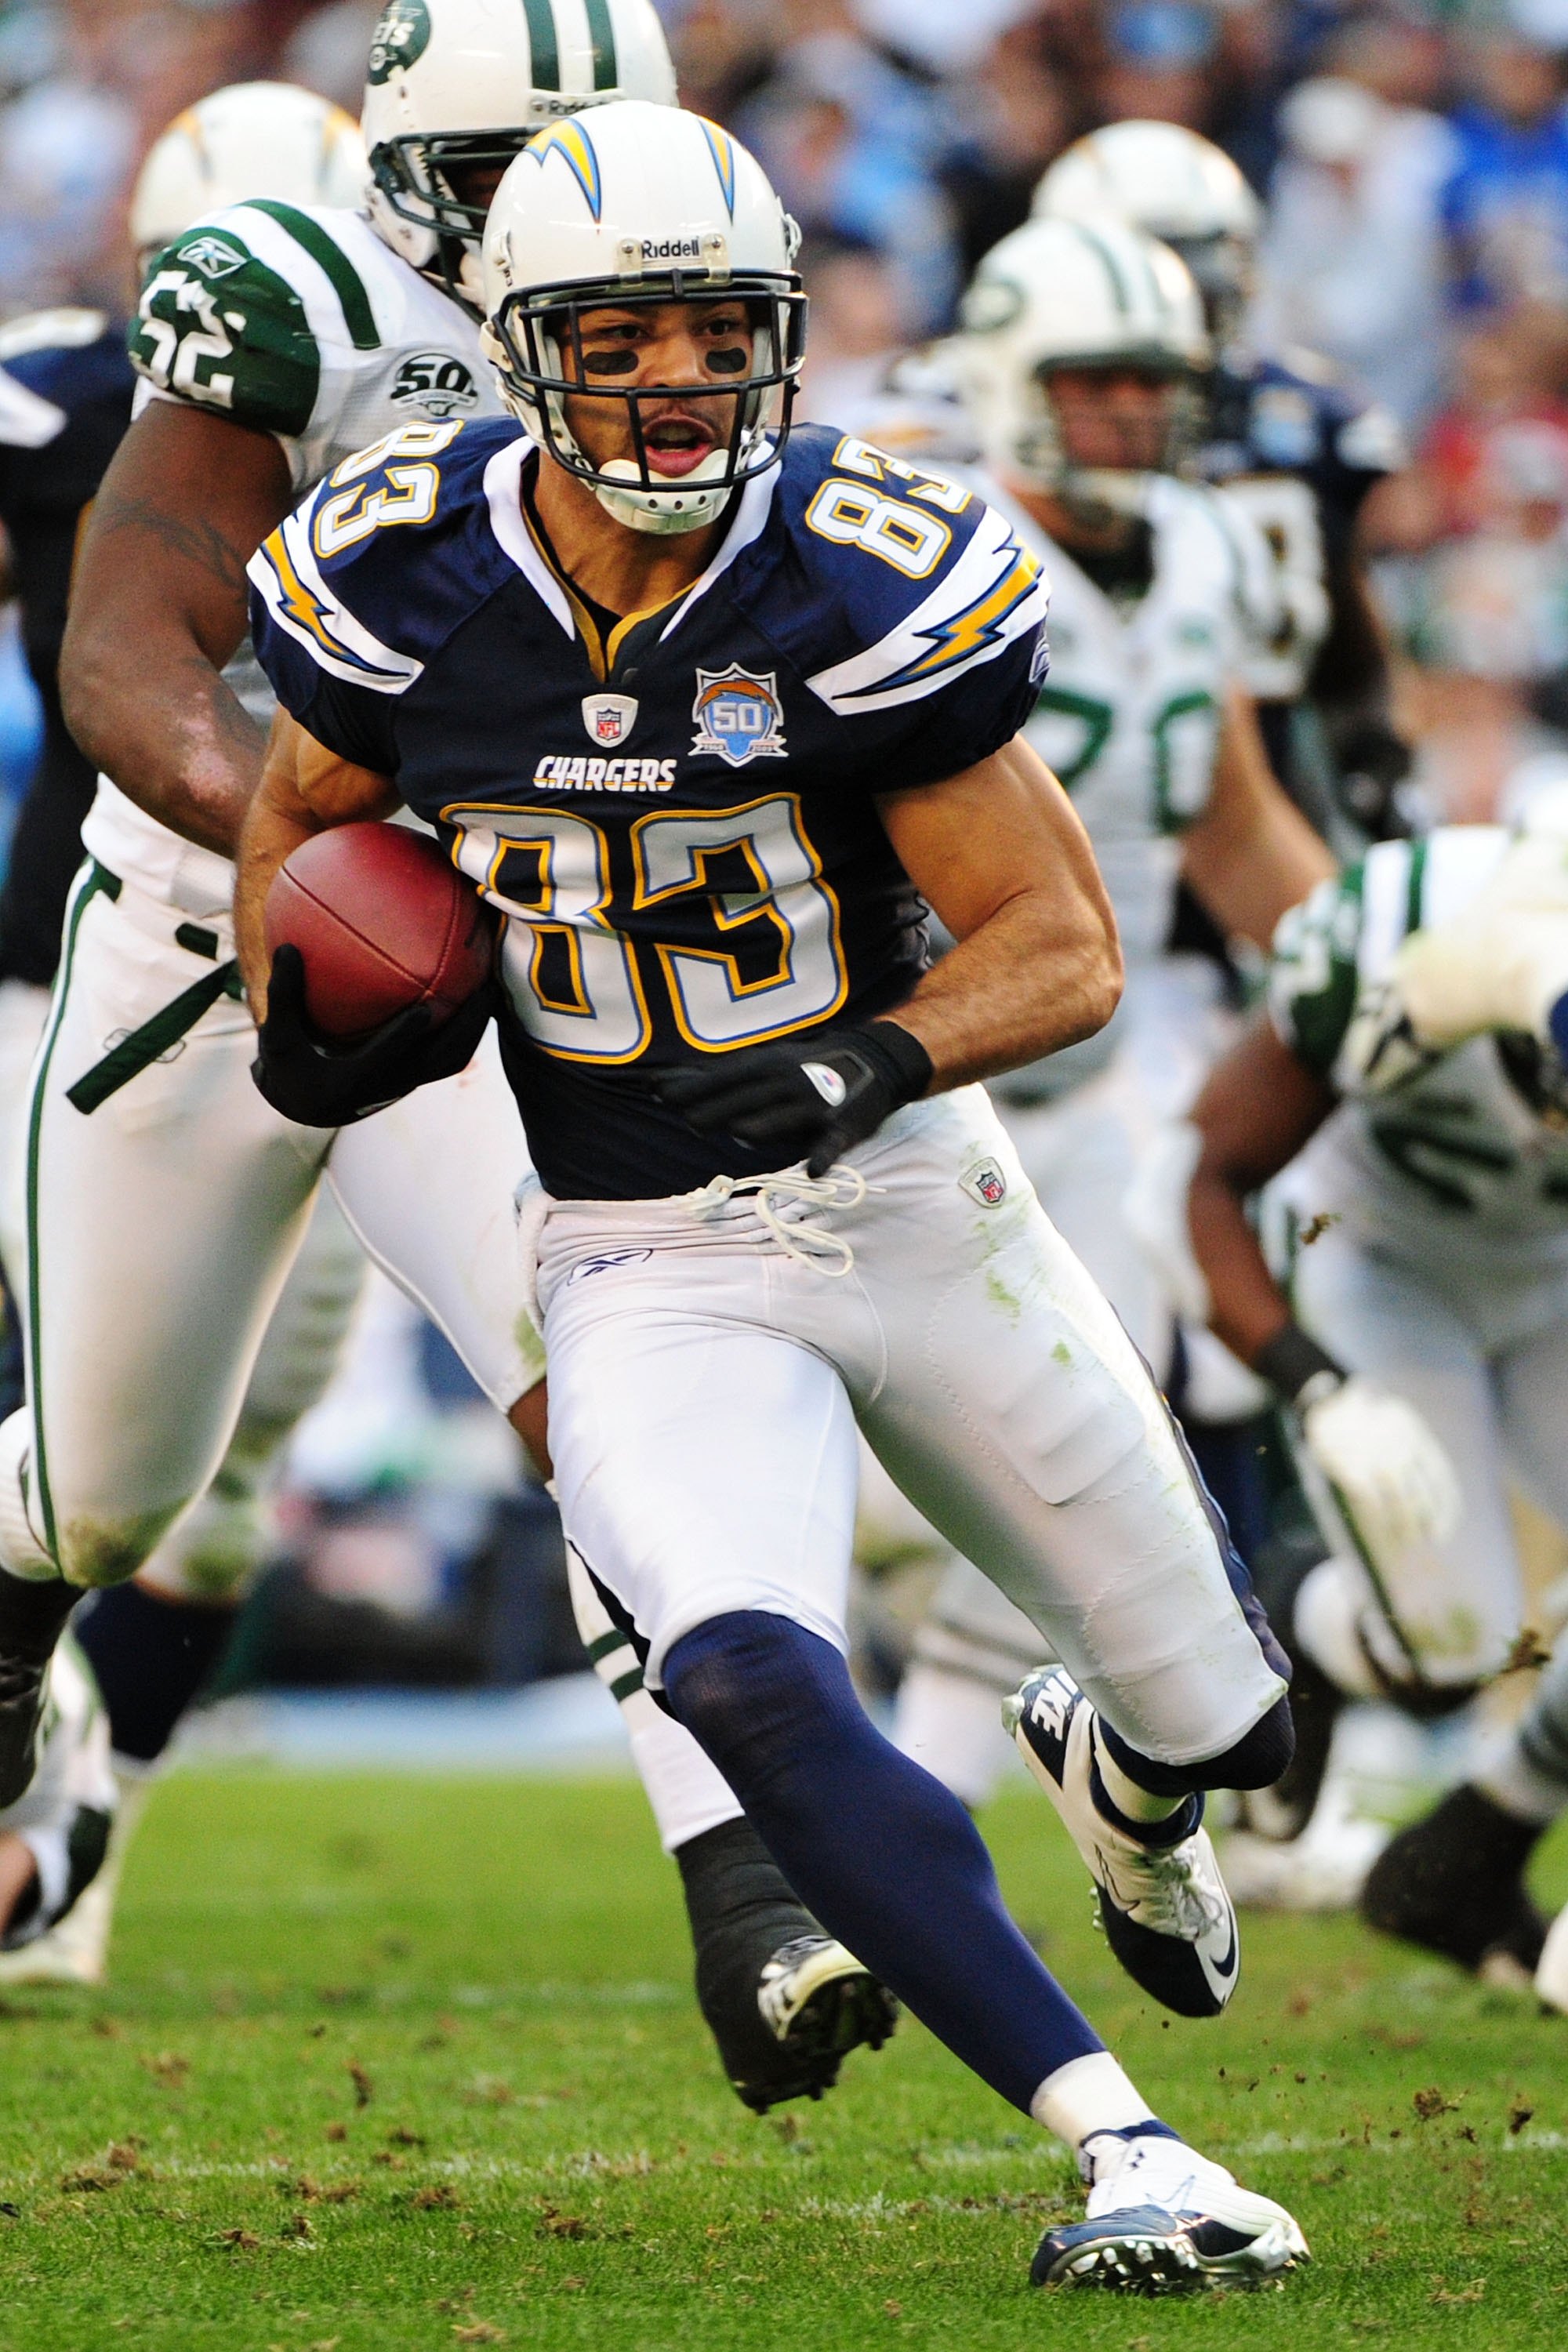 Vincent Jackson may have played his last down as a San Diego Charger.